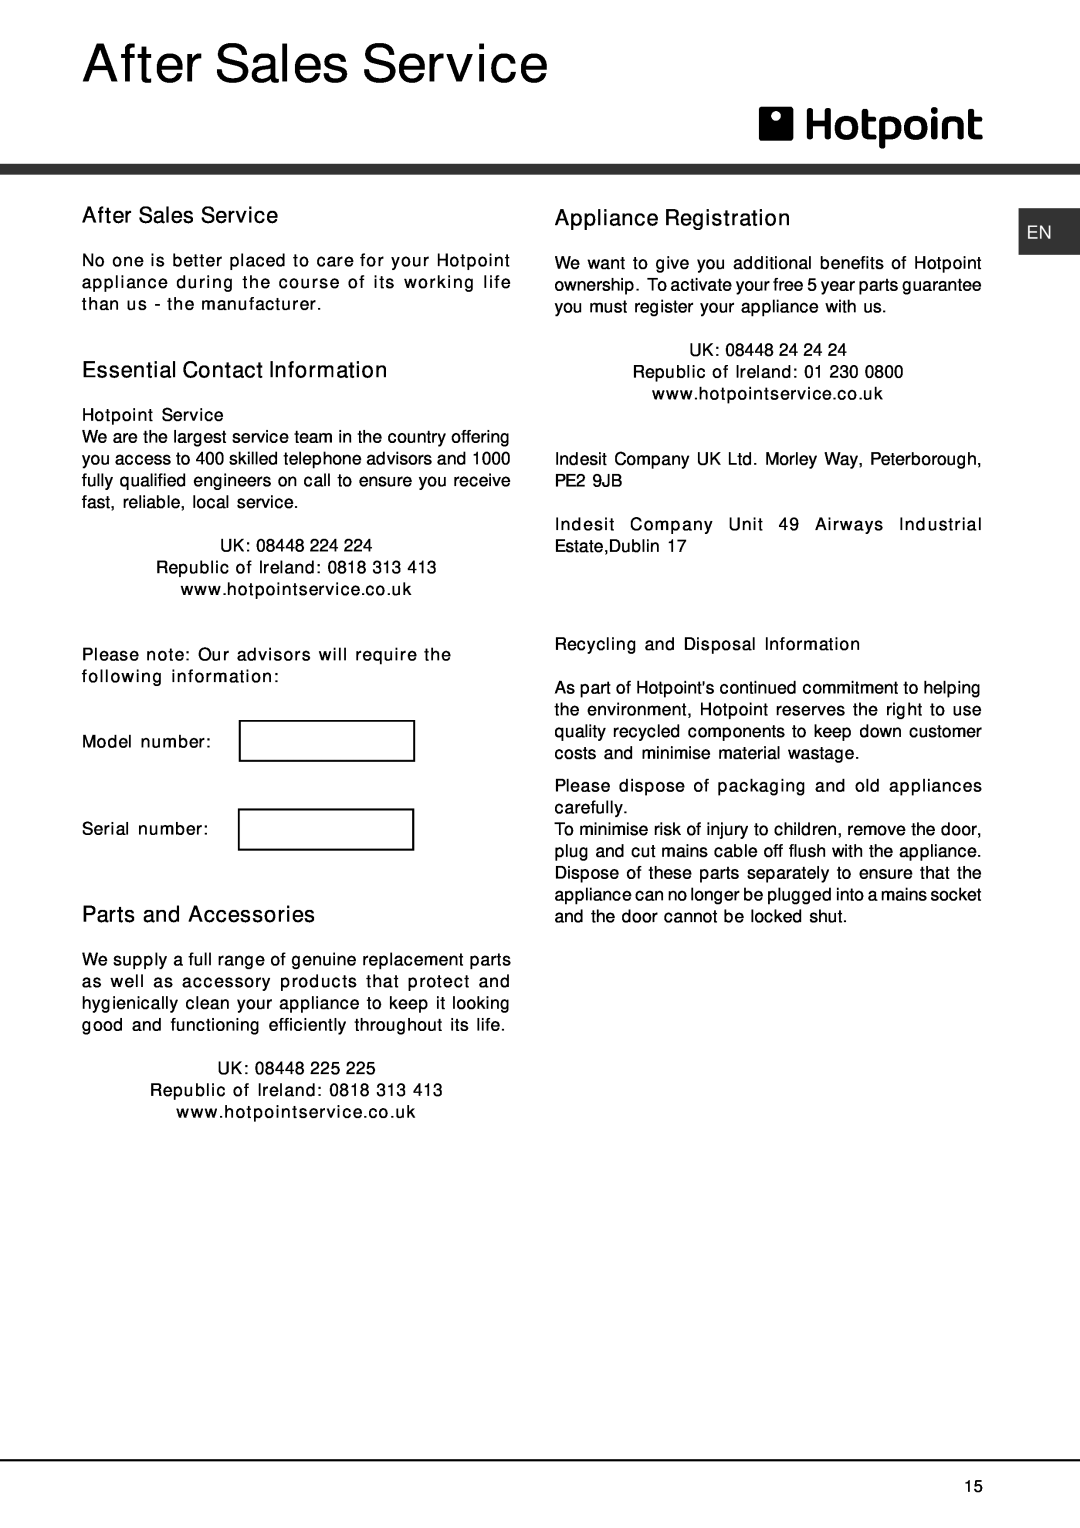 Hotpoint 910 manual After Sales Service, Essential Contact Information, Parts and Accessories, Appliance Registration 